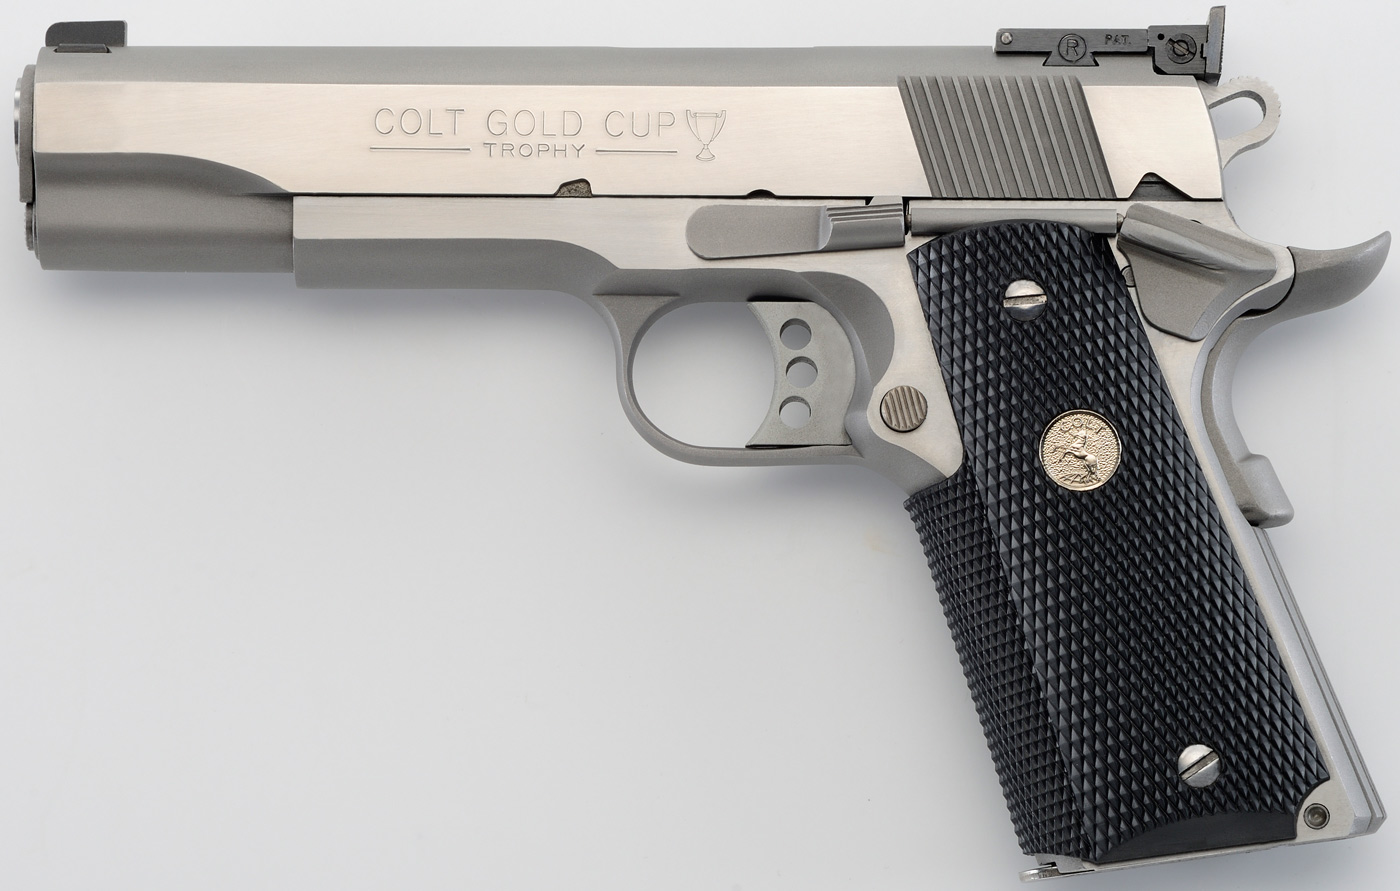 <!DOCTYPE html>
<html>
<body>
<p style="font-family:arial;">
<p align="left">
Action: Semi-automatic <br />
Type: 1911 <br />
Caliber: 45 ACP <br />
Size: Full <br />
Frame/Material: Steel <br />
Finish/Color: Brushed Stainless <br />
Capacity: 8Rd <br />
Accessories: 2 Mags <br />
<h1 style="color:green">​$1,249.95</h1>
</p></body></html>